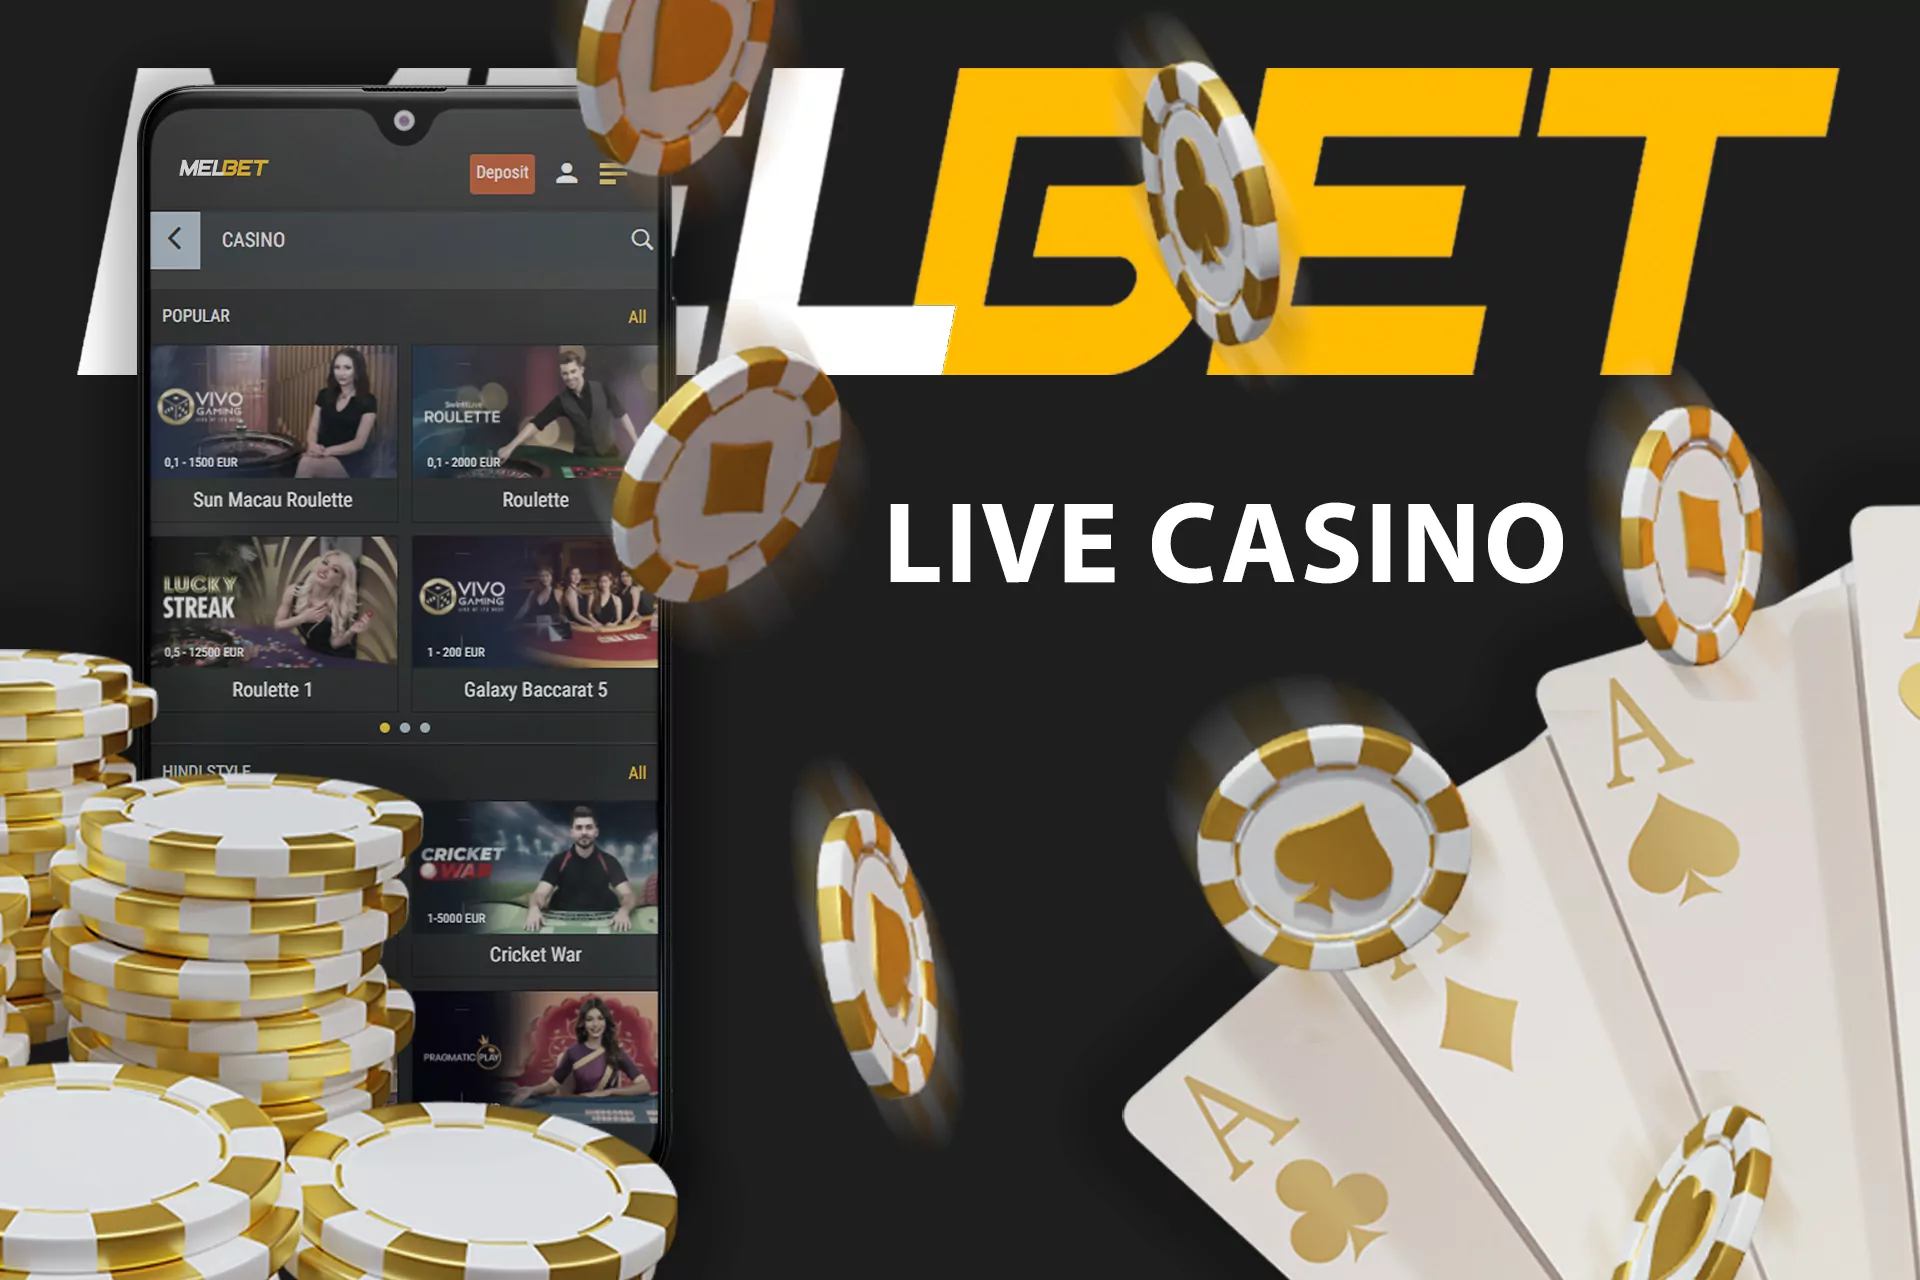 In the Melbet live casino, you can play table games with real dealers online.